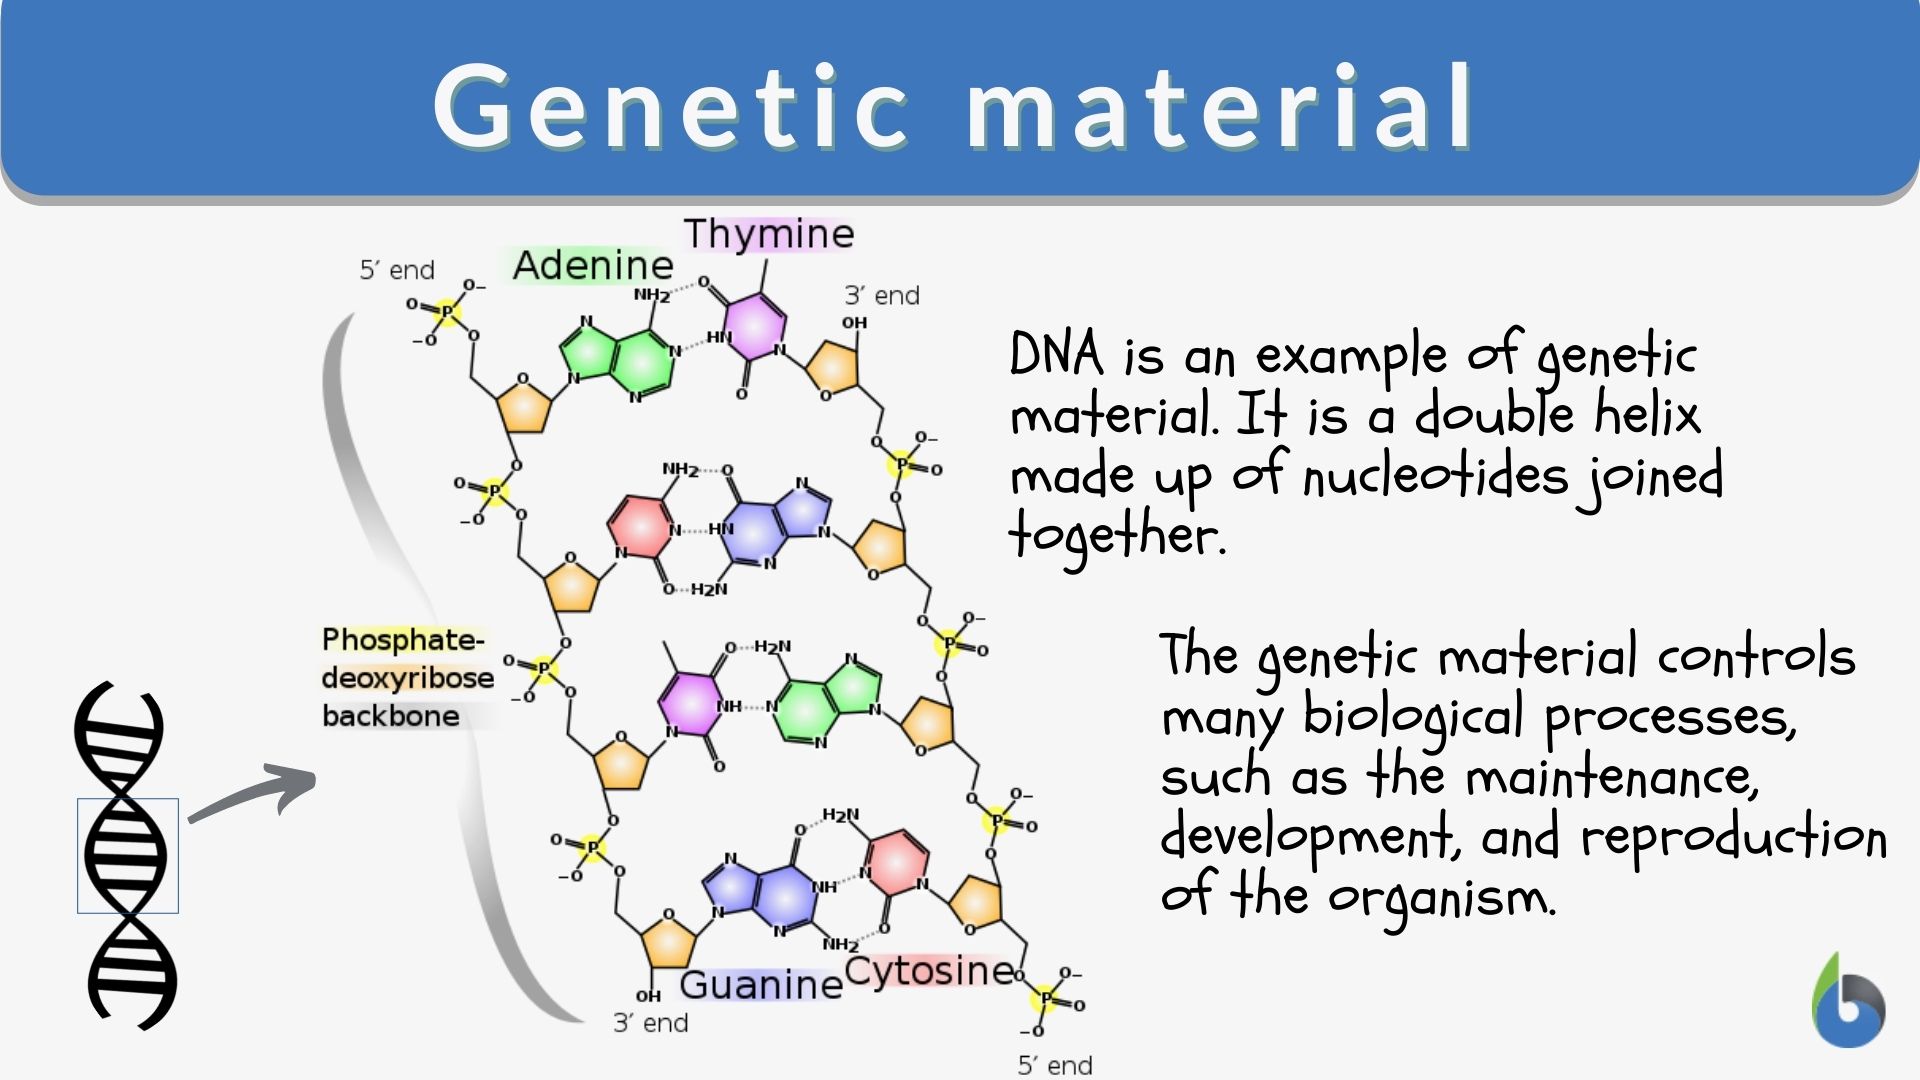 Genetic material - Definition and Examples - Biology Online Dictionary